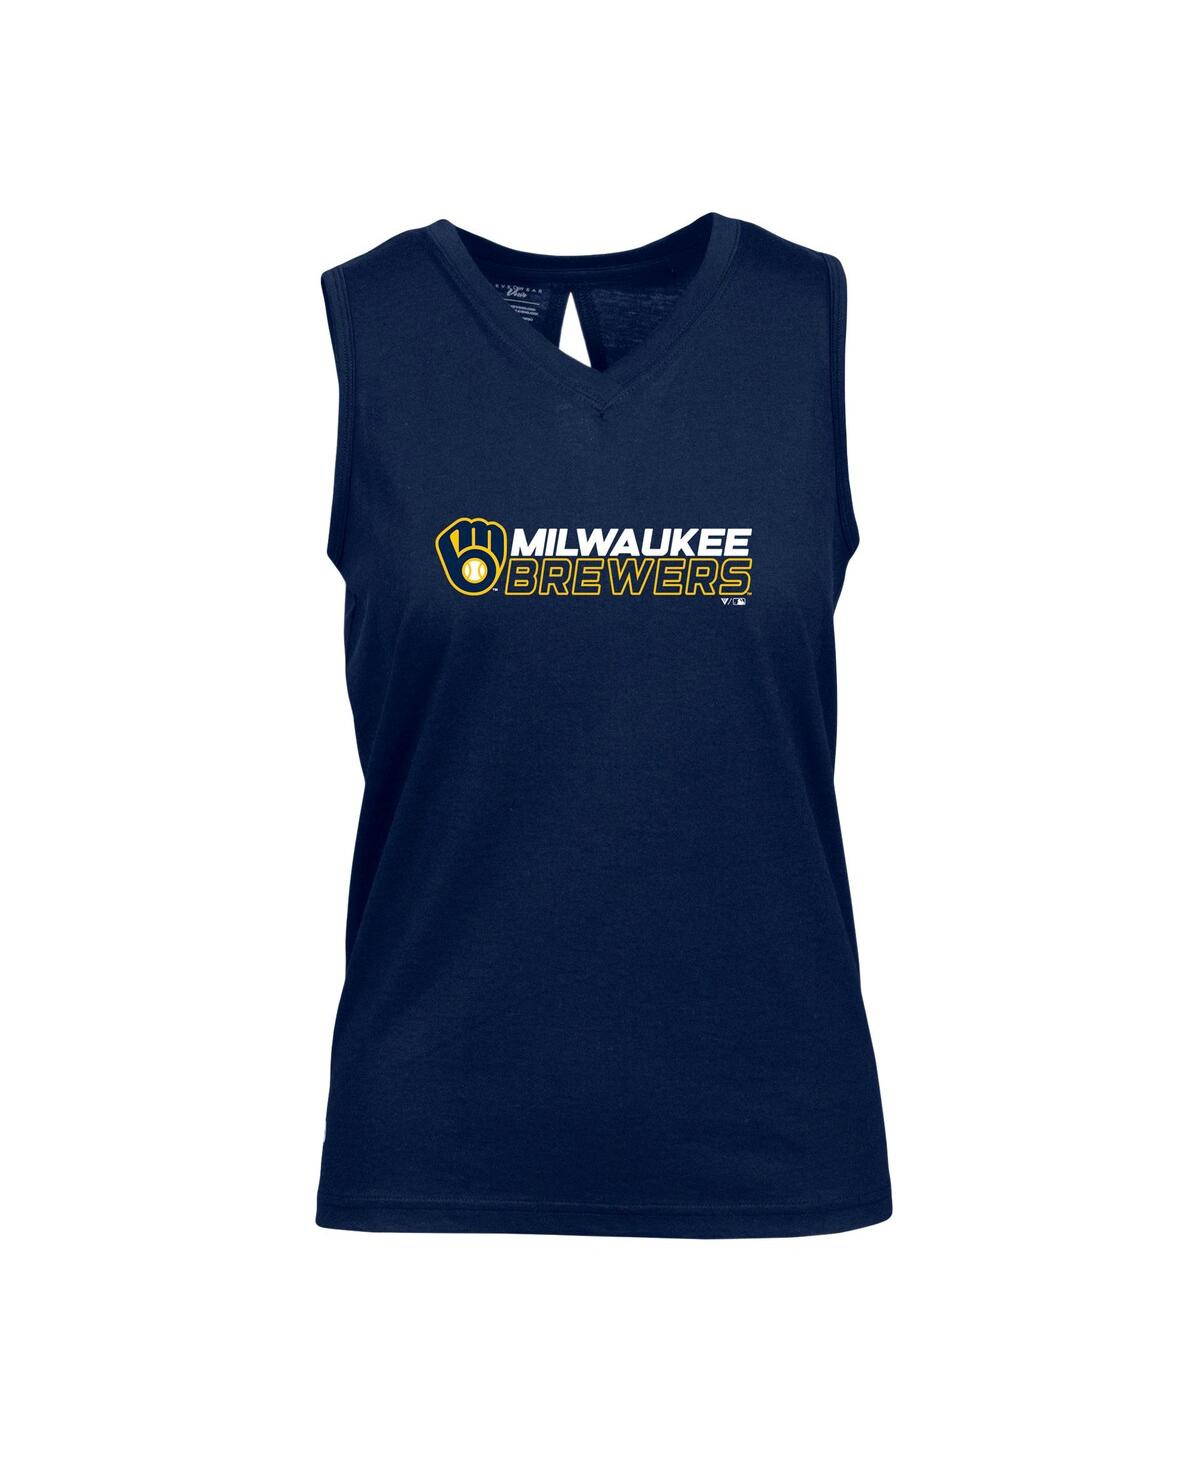 Women's LevelWear Navy Milwaukee Brewers Paisley Chase V-Neck Tank Top - Navy